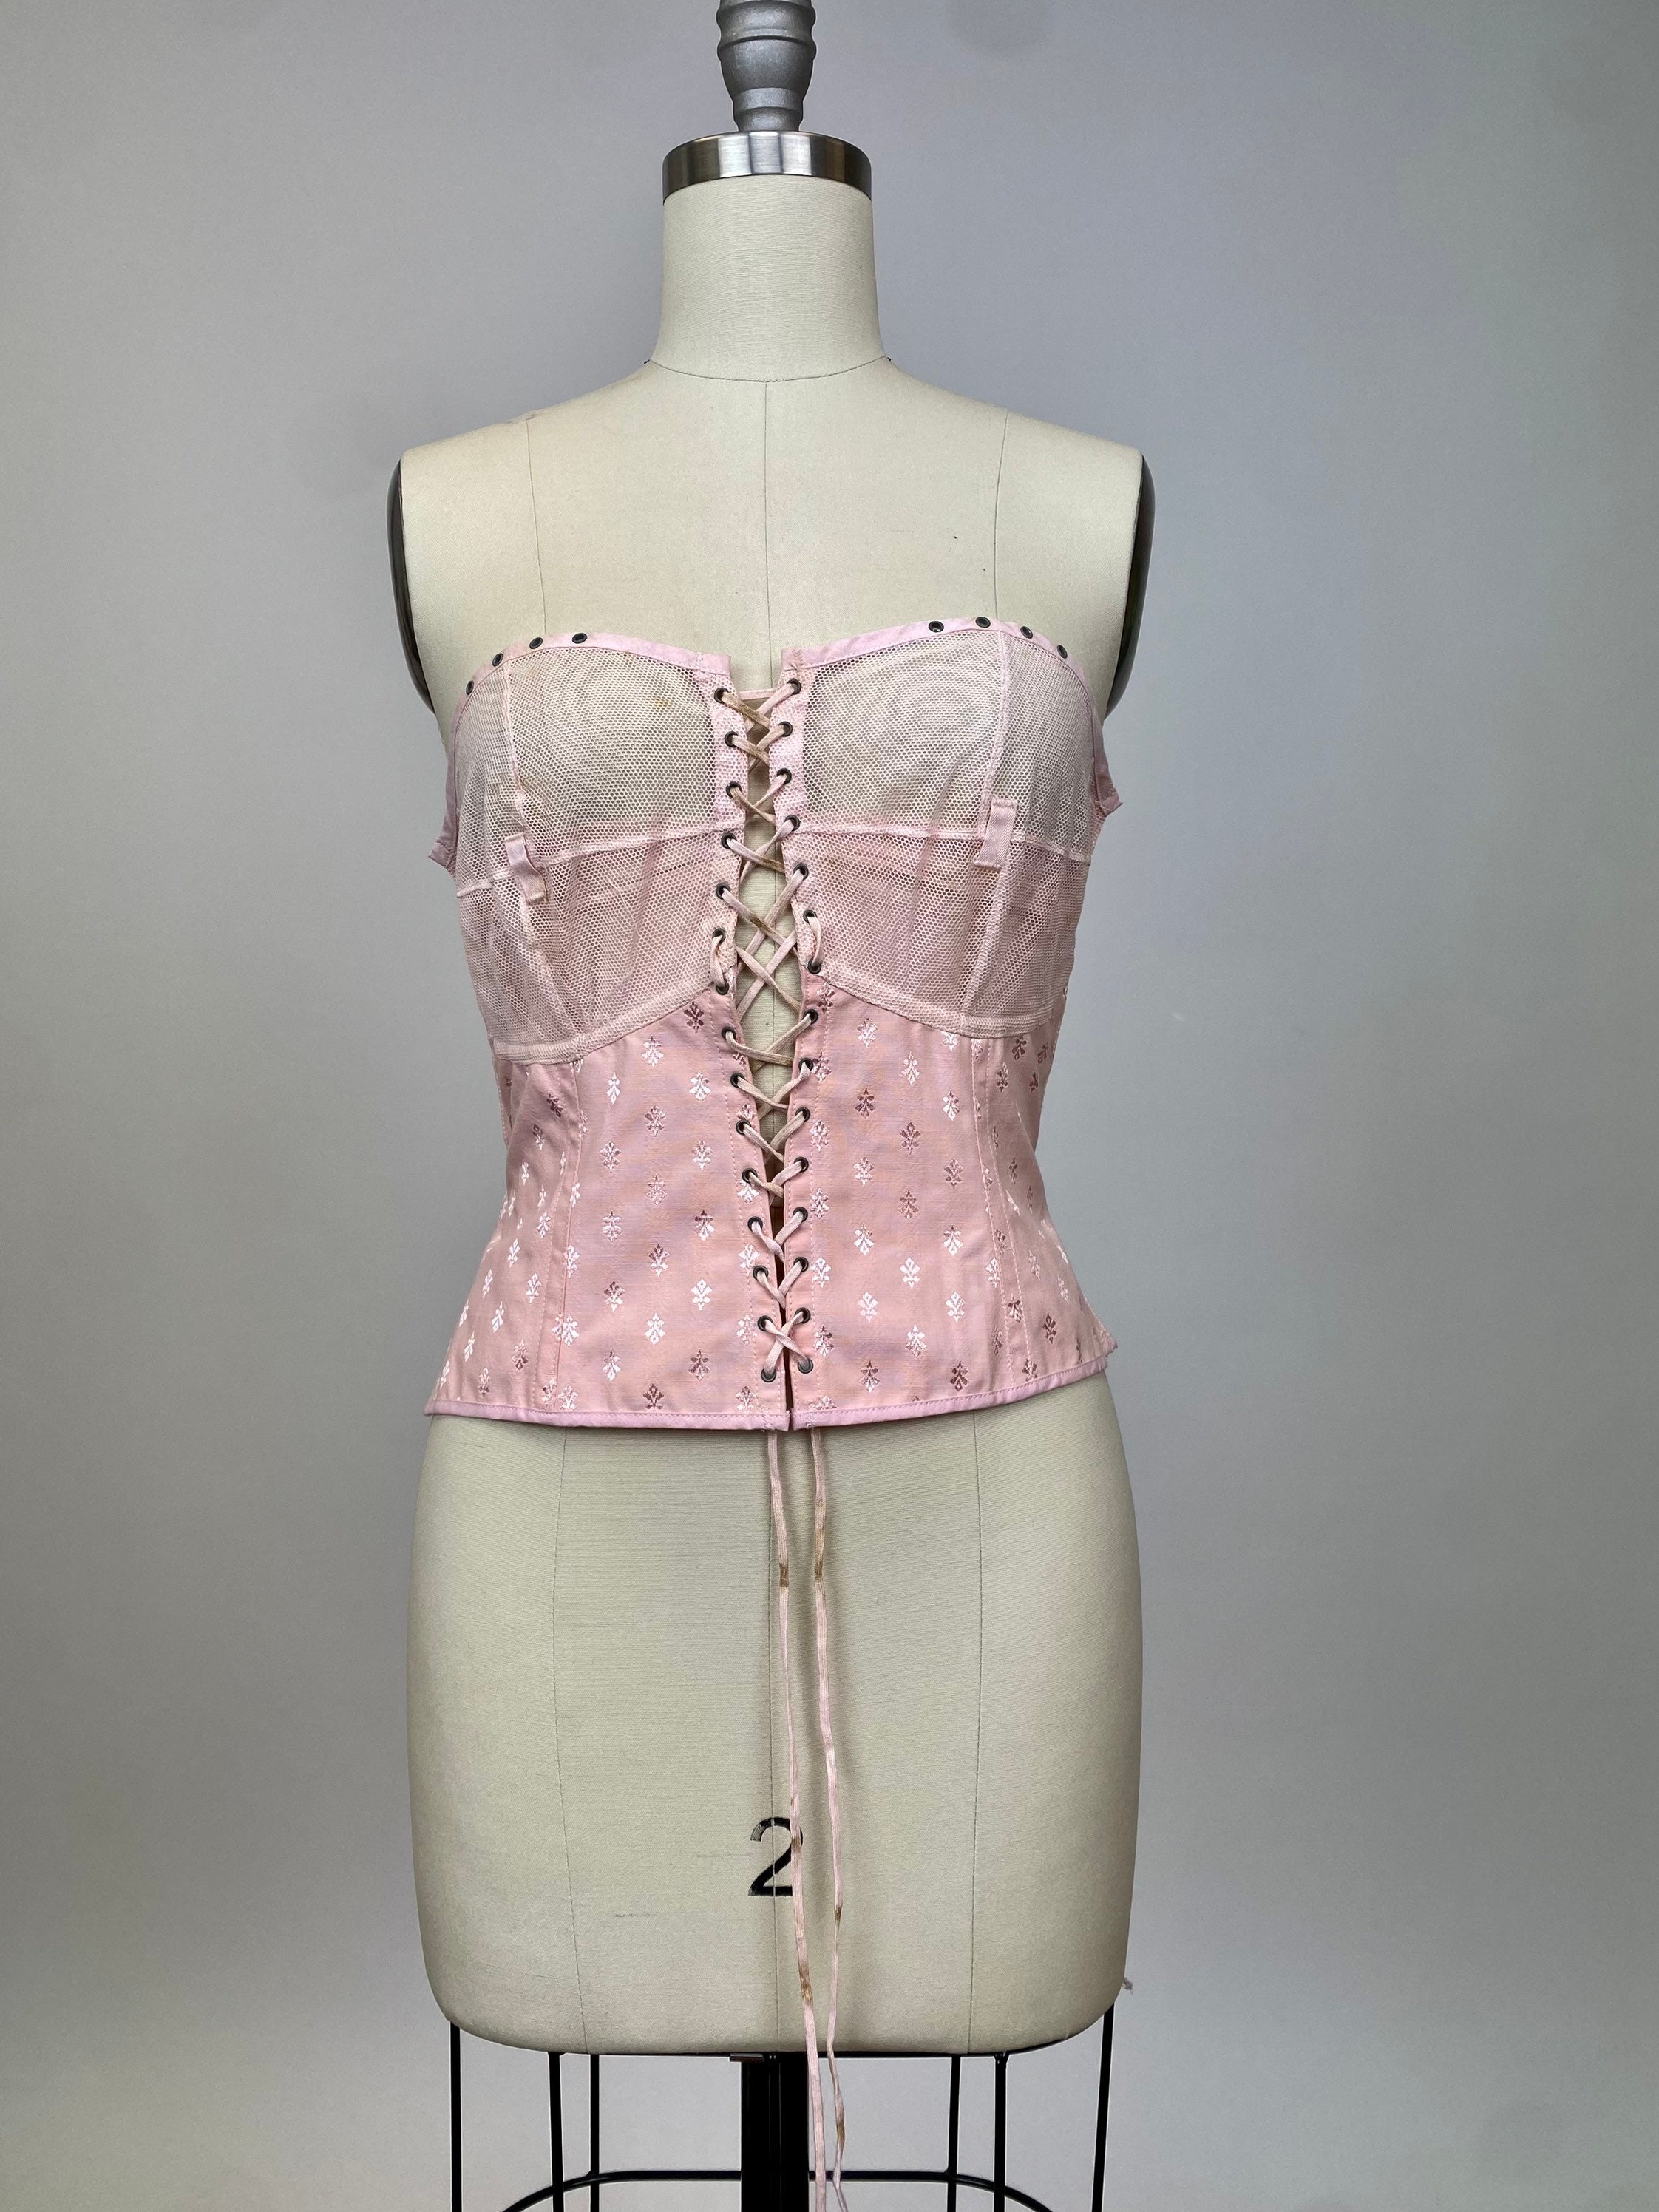 Rare Vintage Early 1900s Spirella Corset, Bustier, Lace up